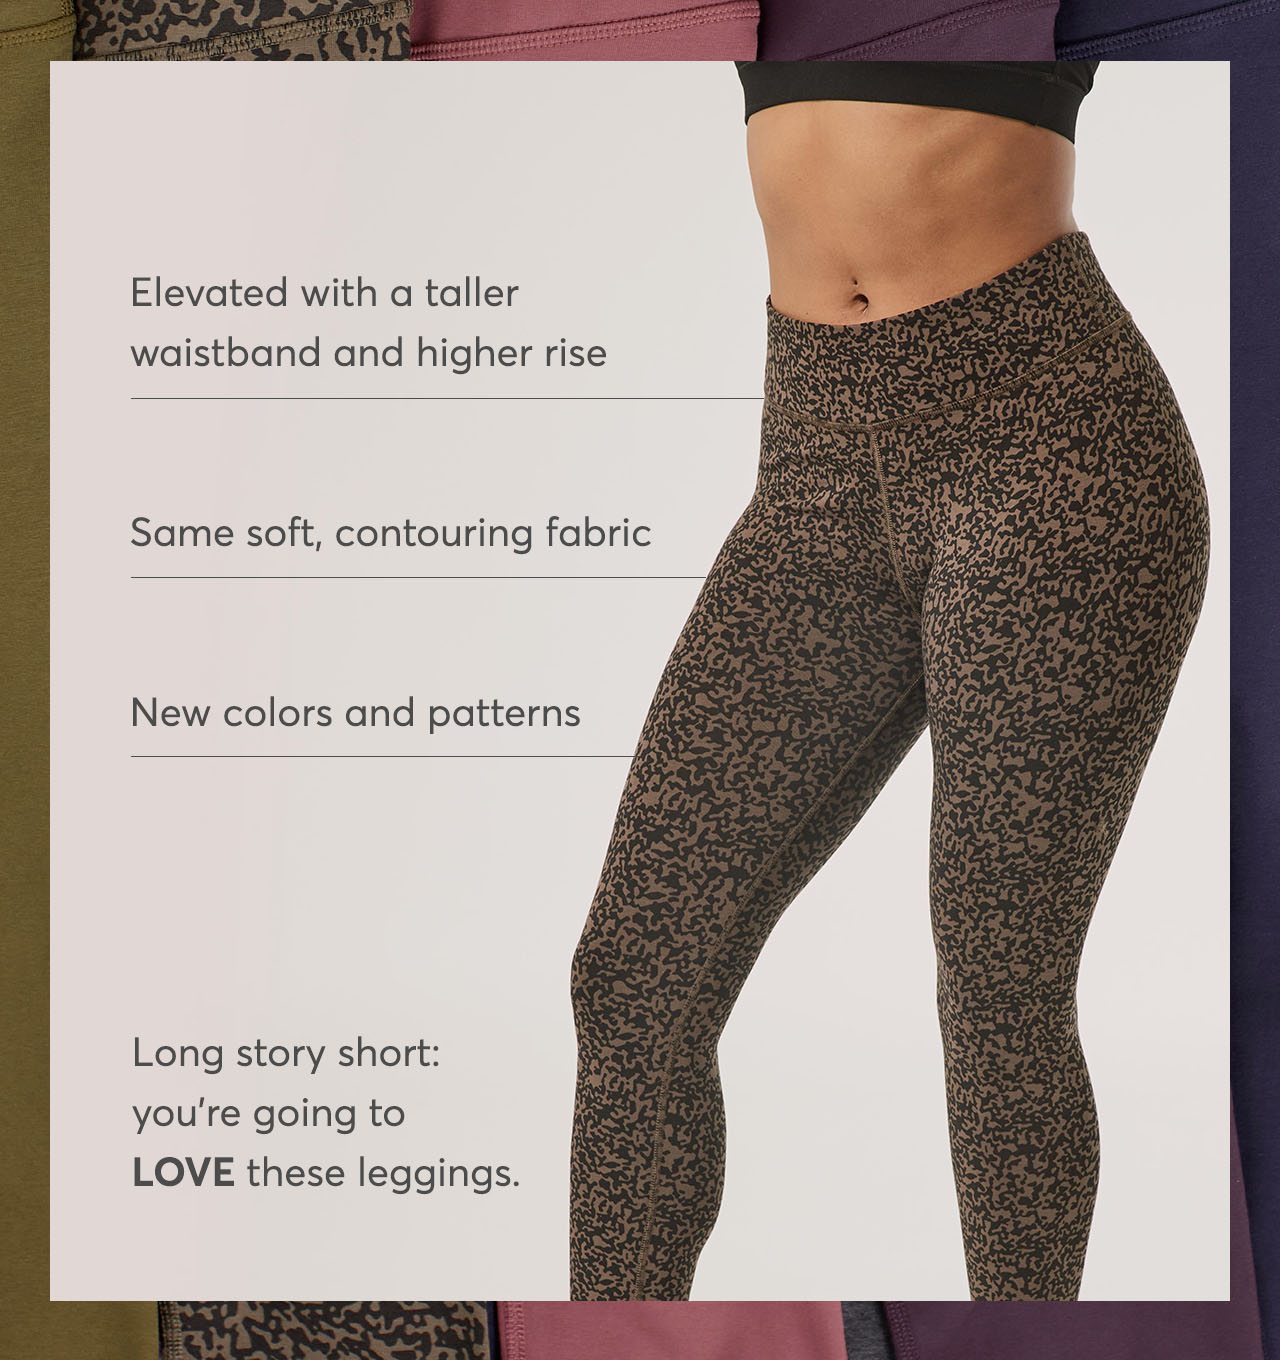 Elevated waistband, soft, contouring fabric, new colors & patterns. Long story short: you're going to love these leggings.